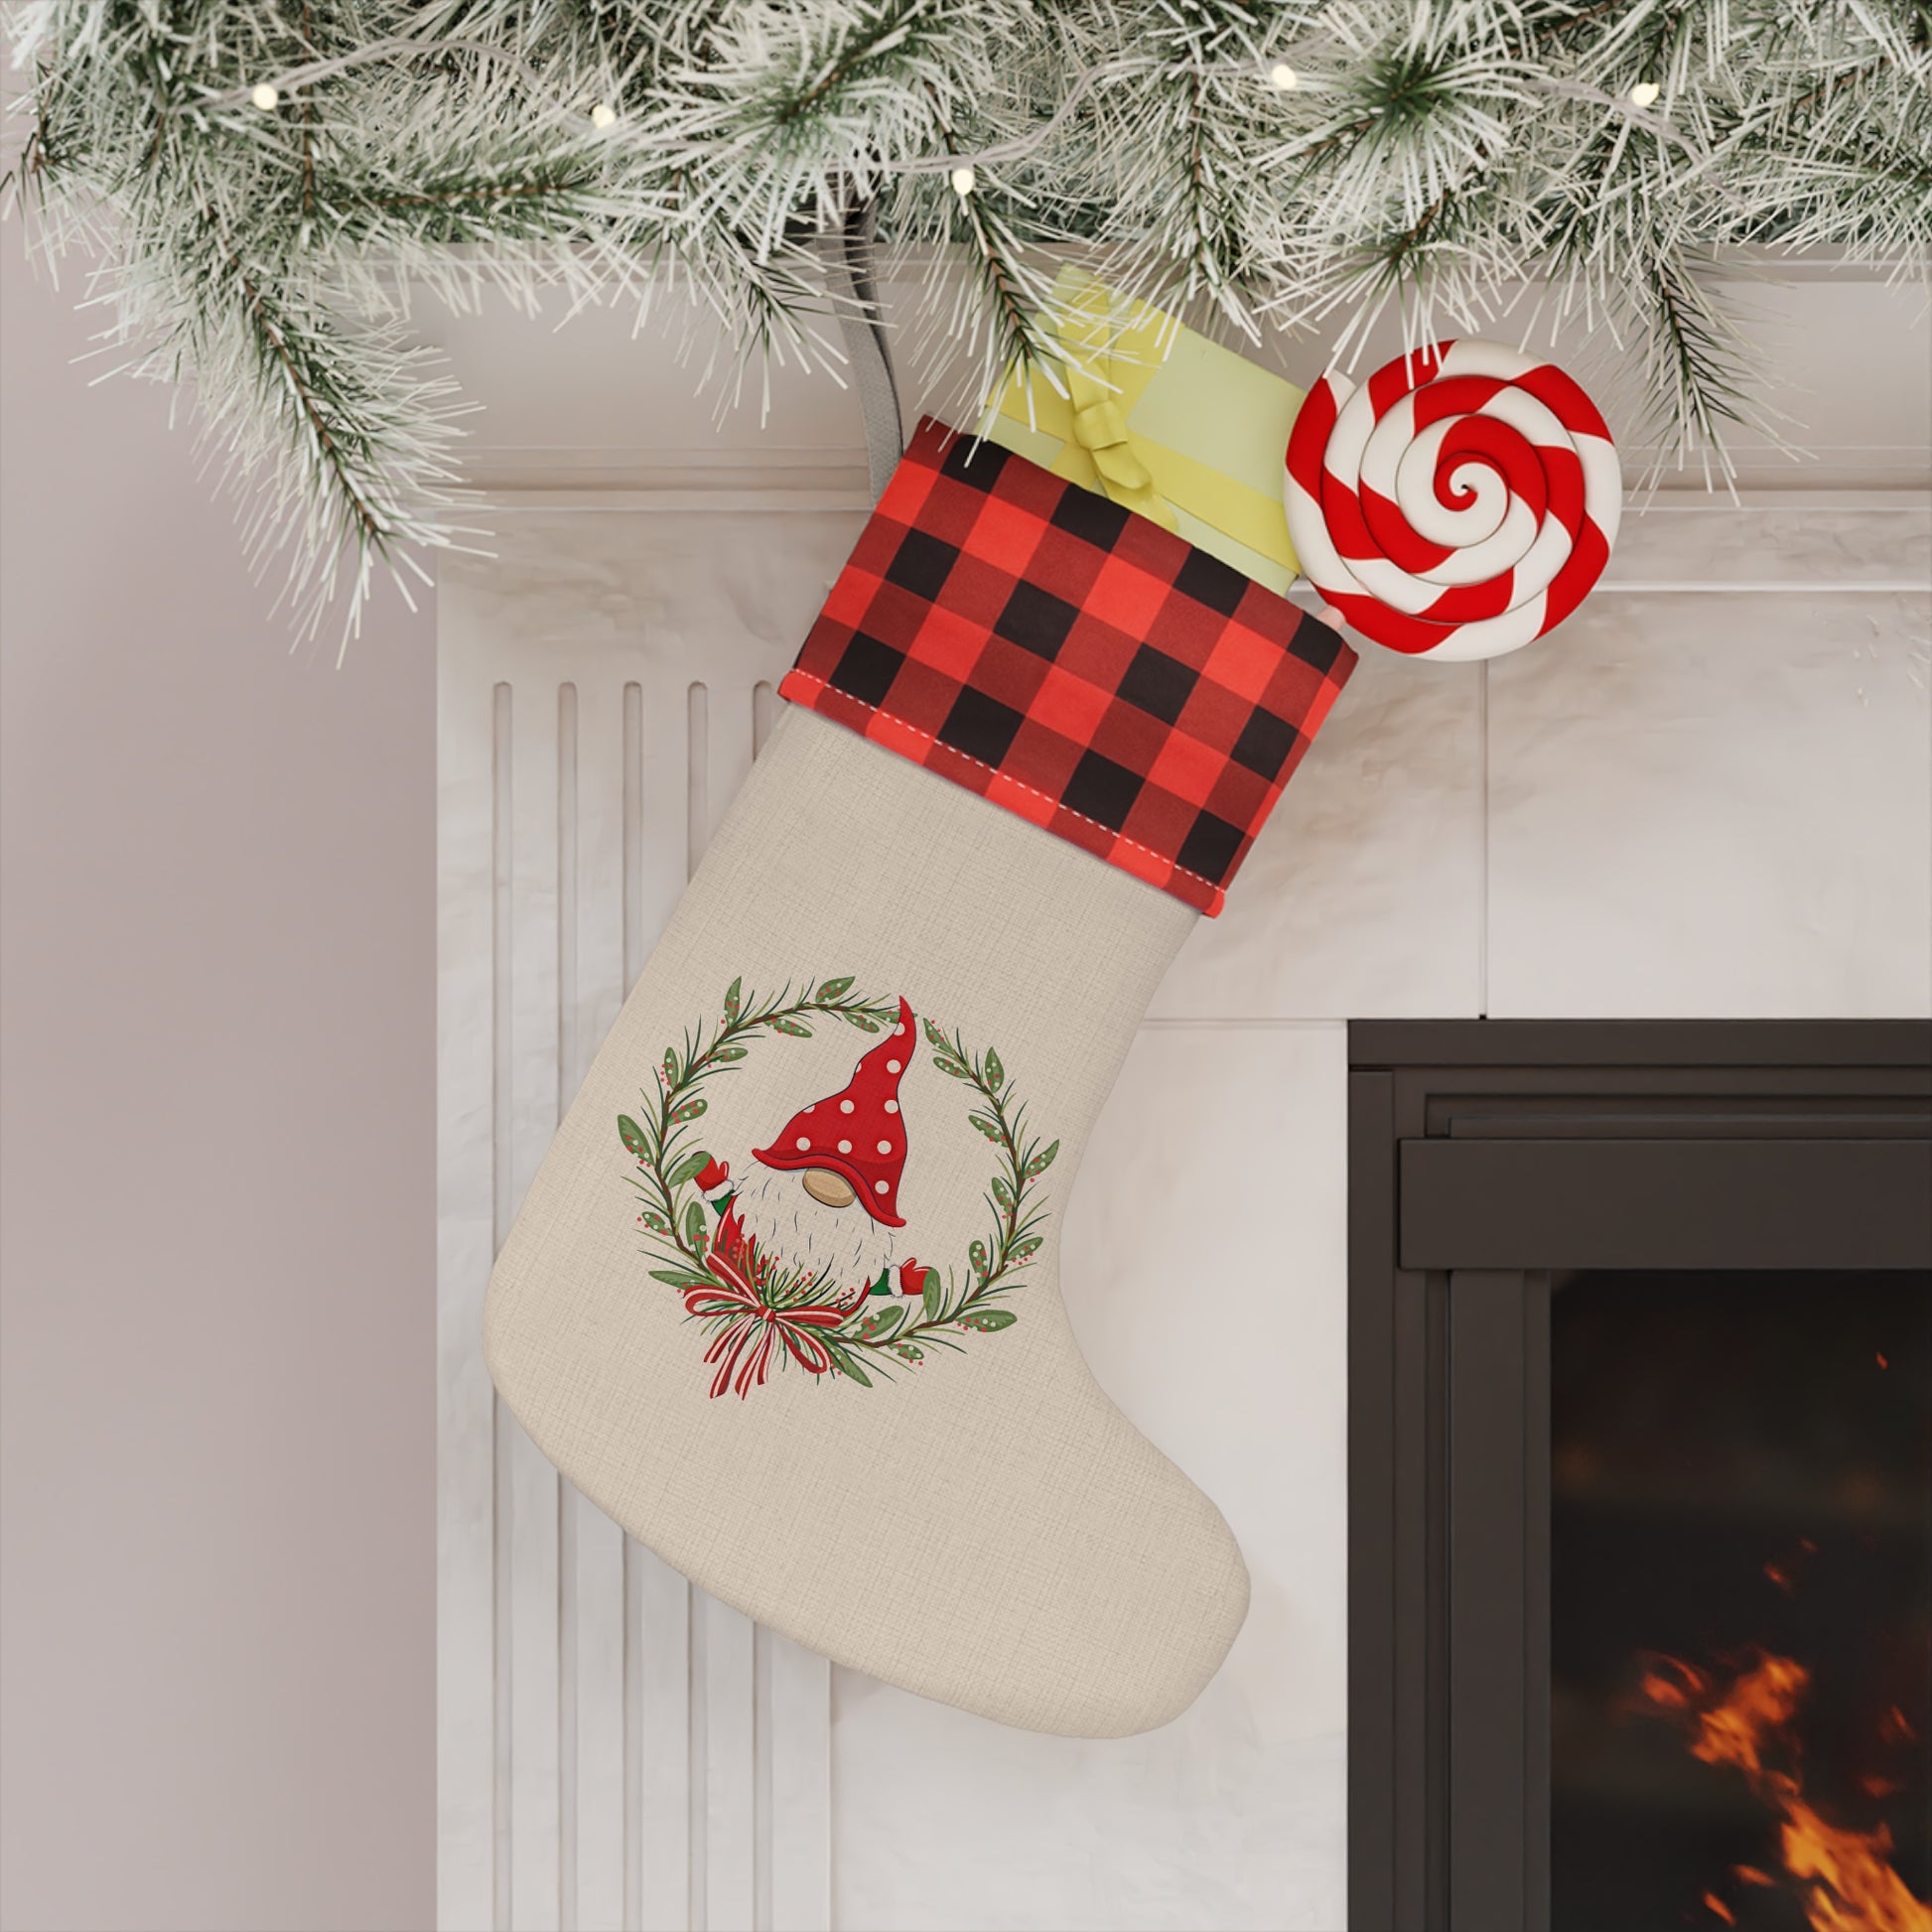 A Printify Holiday-Gnome Christmas Stocking hangs on the fireplace.